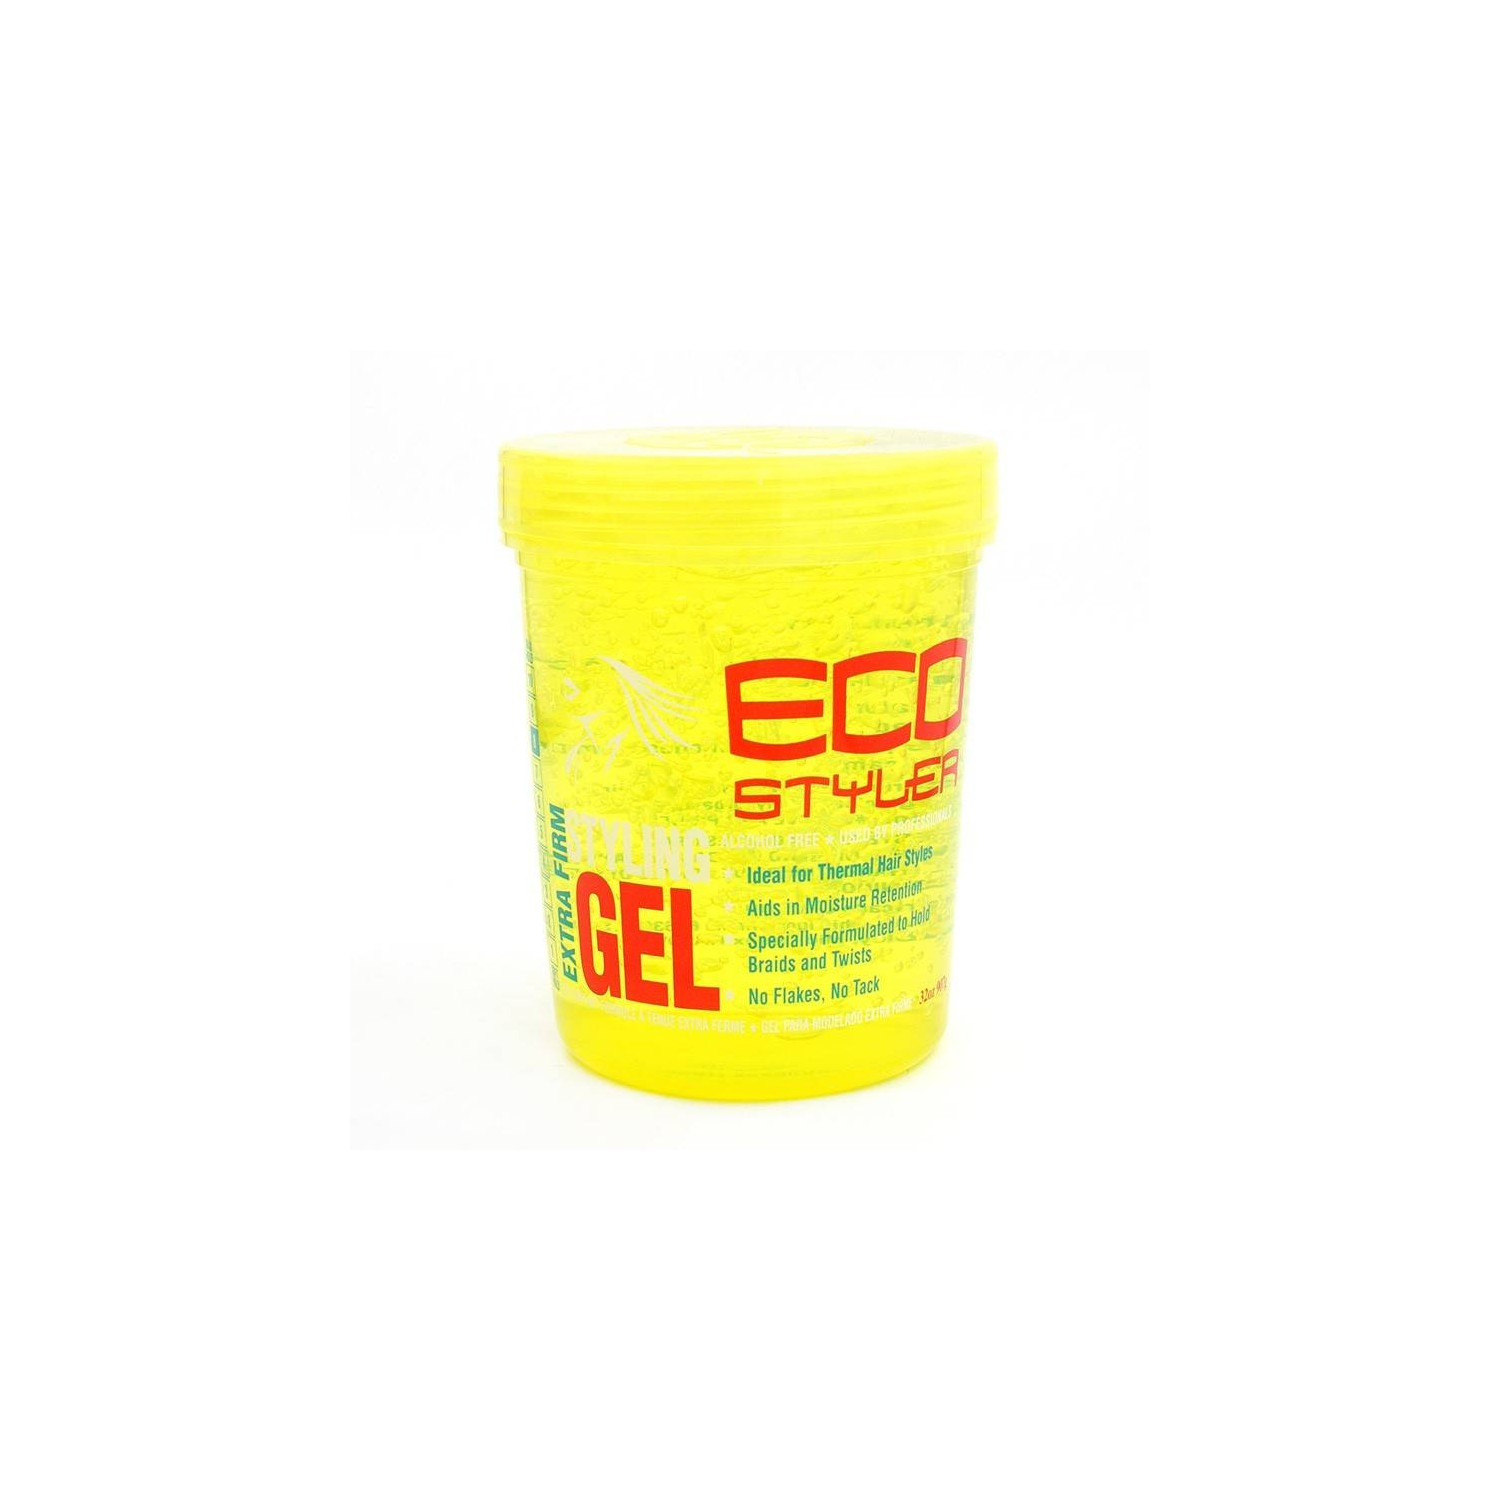 Eco Styler Styling Gel Colore Yellow 907 Gr